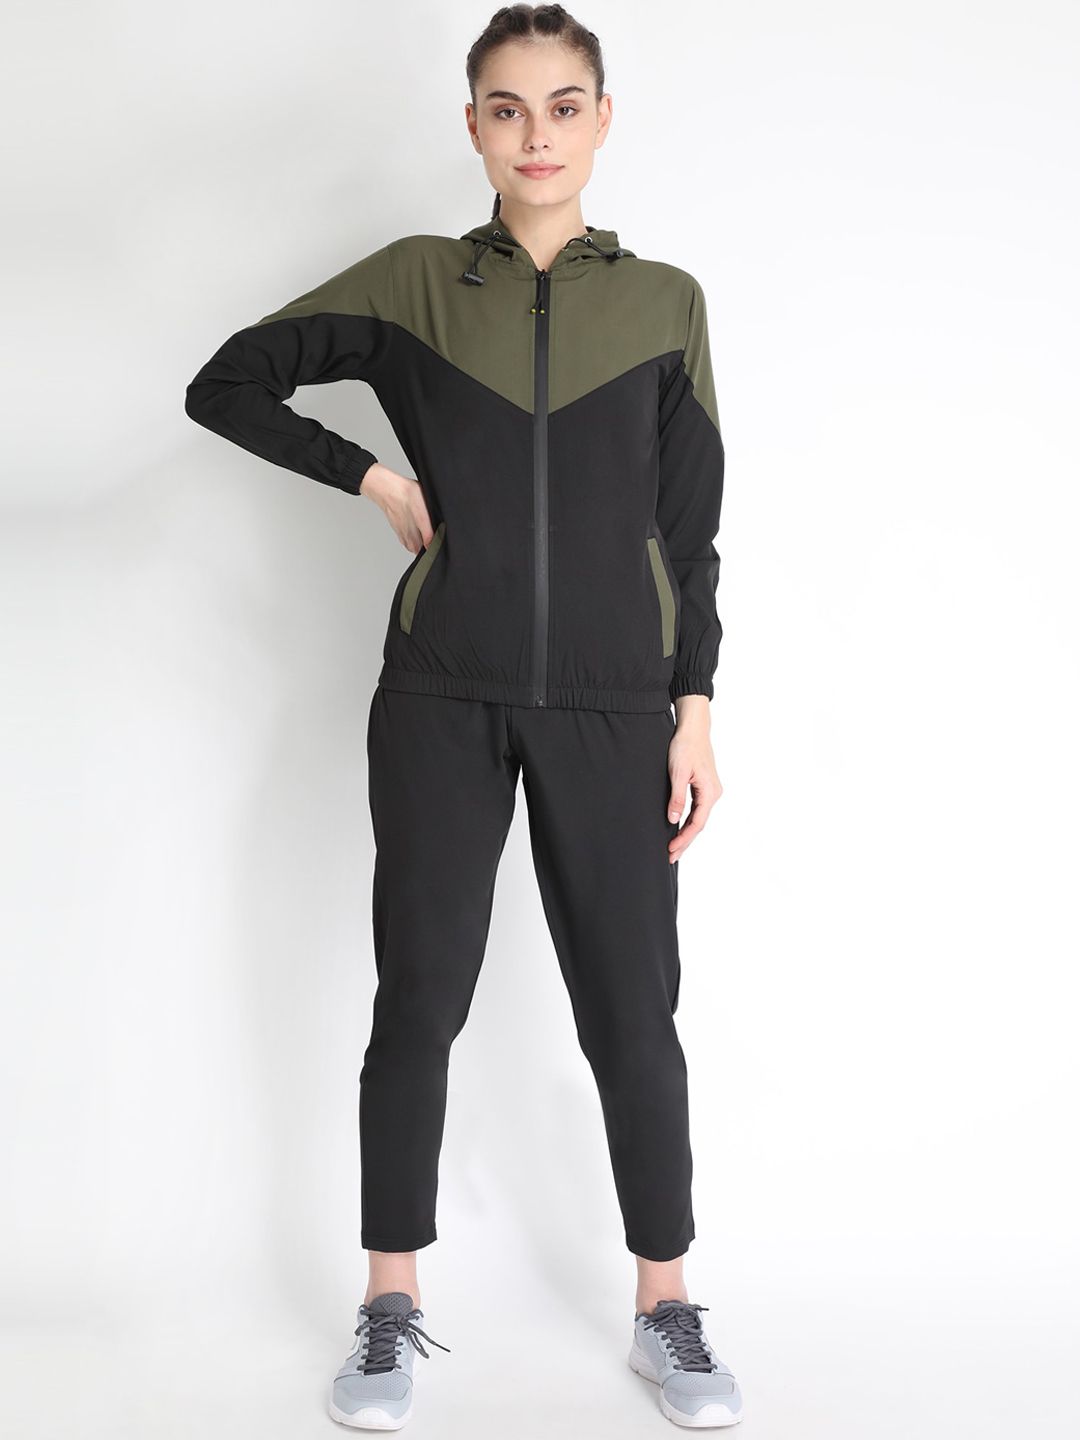 Chkokko Woman Olive Green & Black Colorblocked Tracksuit Price in India